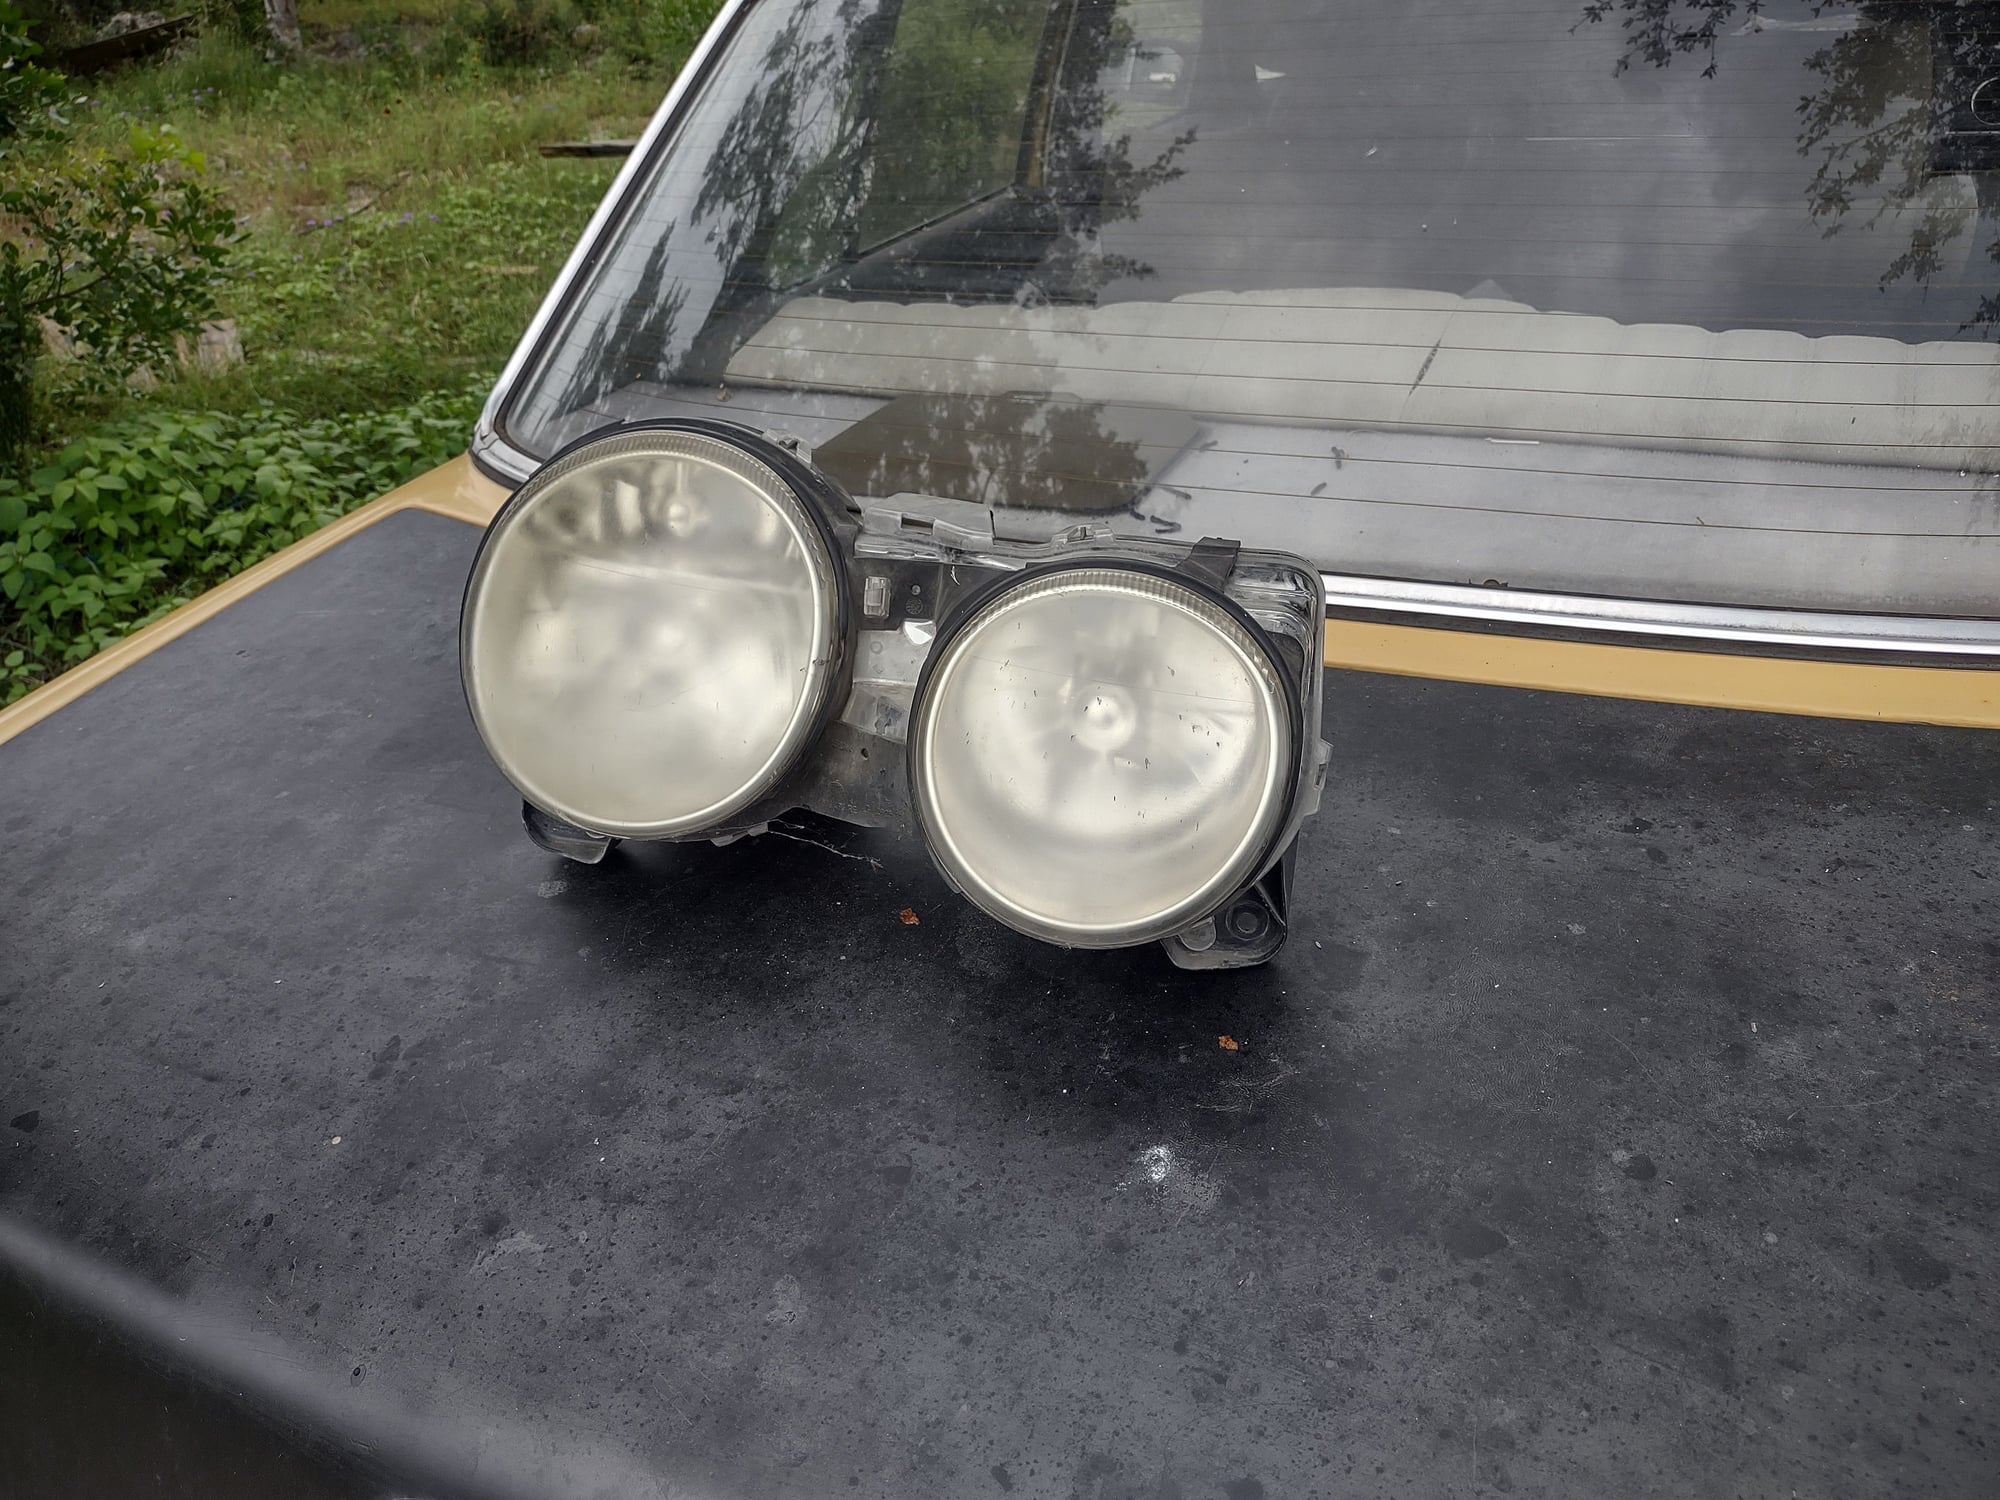 Lights - Pre facelift s type headlight - Used - 1998 to 2004 Jaguar S-Type - Fair Oaks Ranch, TX 78015, United States